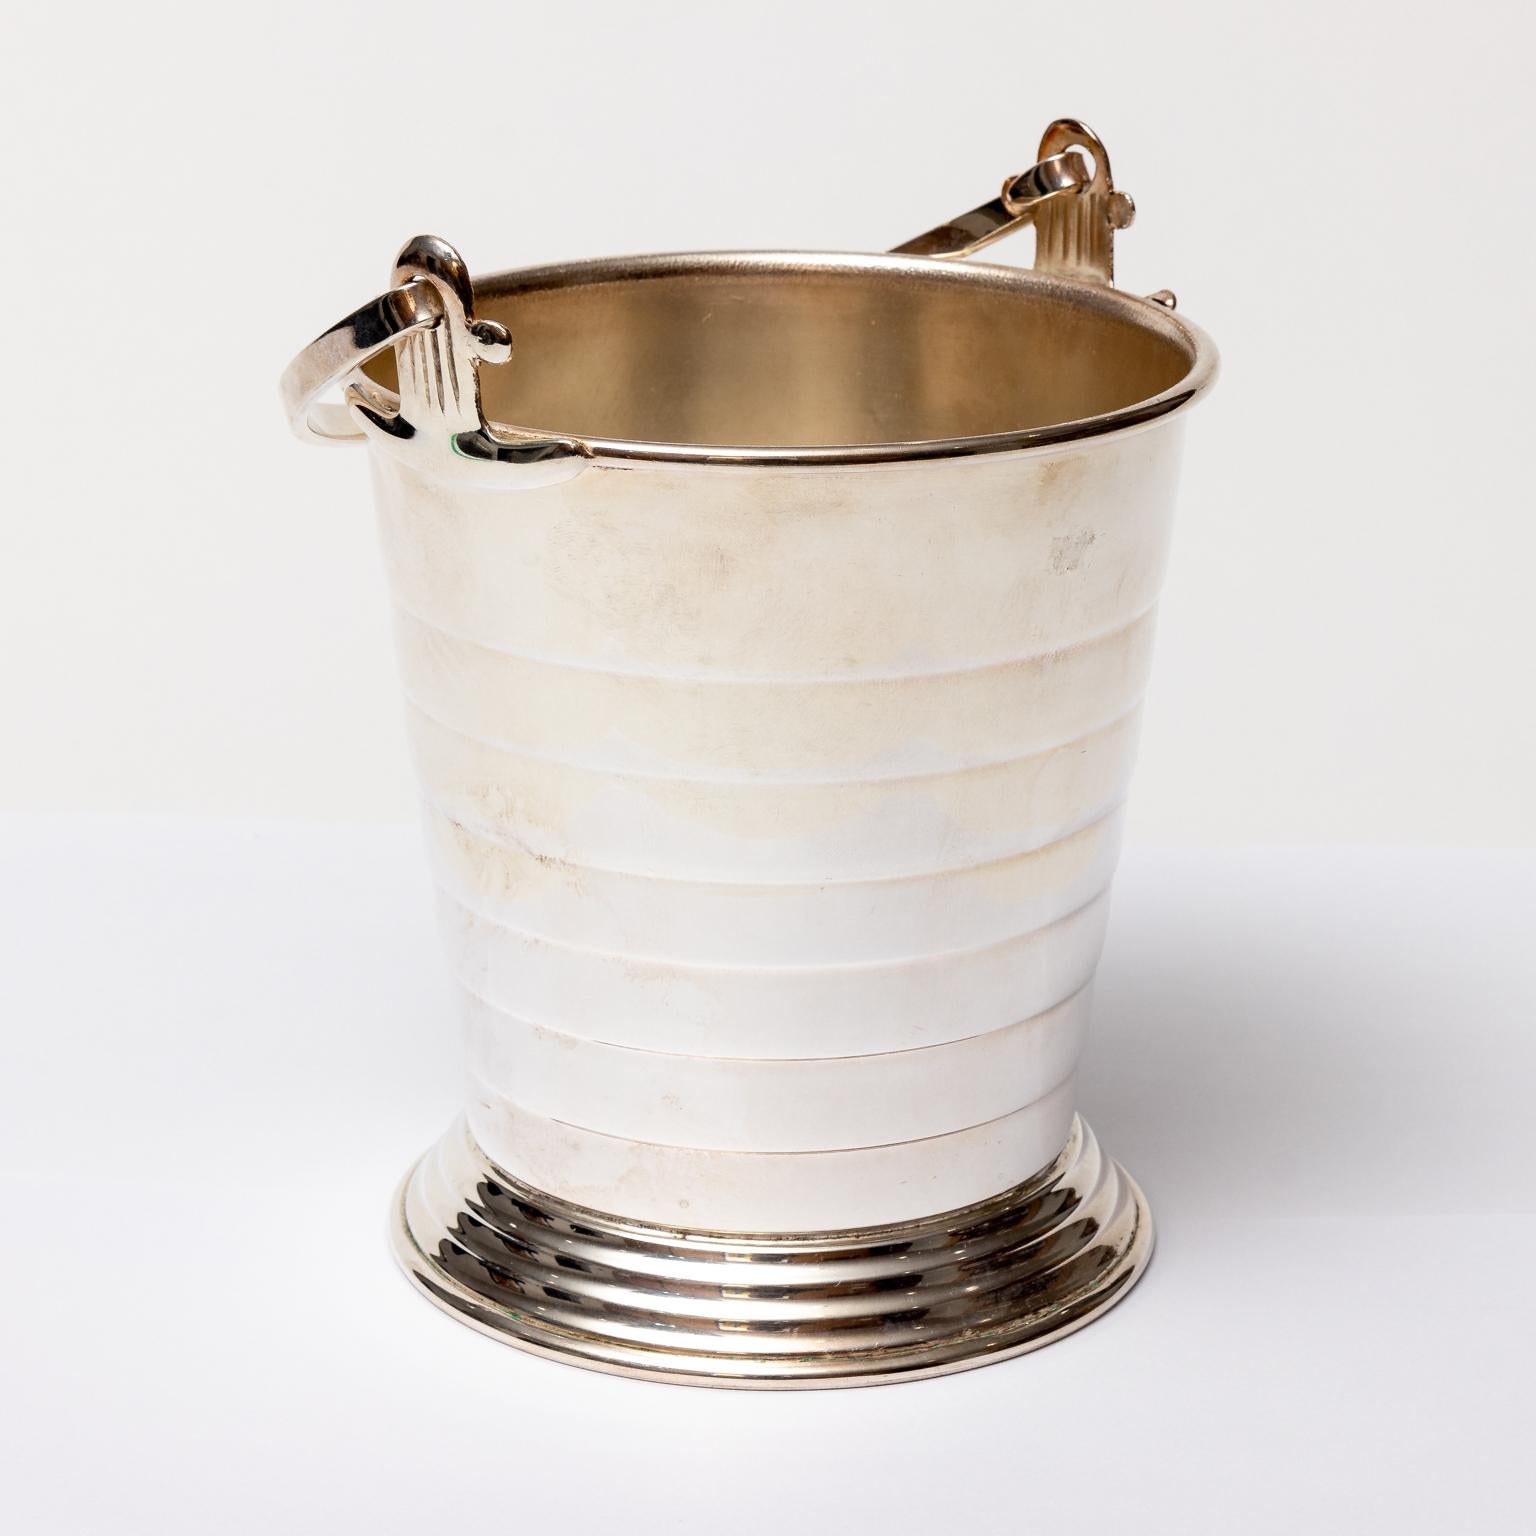 Circa 1930s English Deco silver plate ice pail with liner and handle. Made in England. Please note of wear consistent with age.